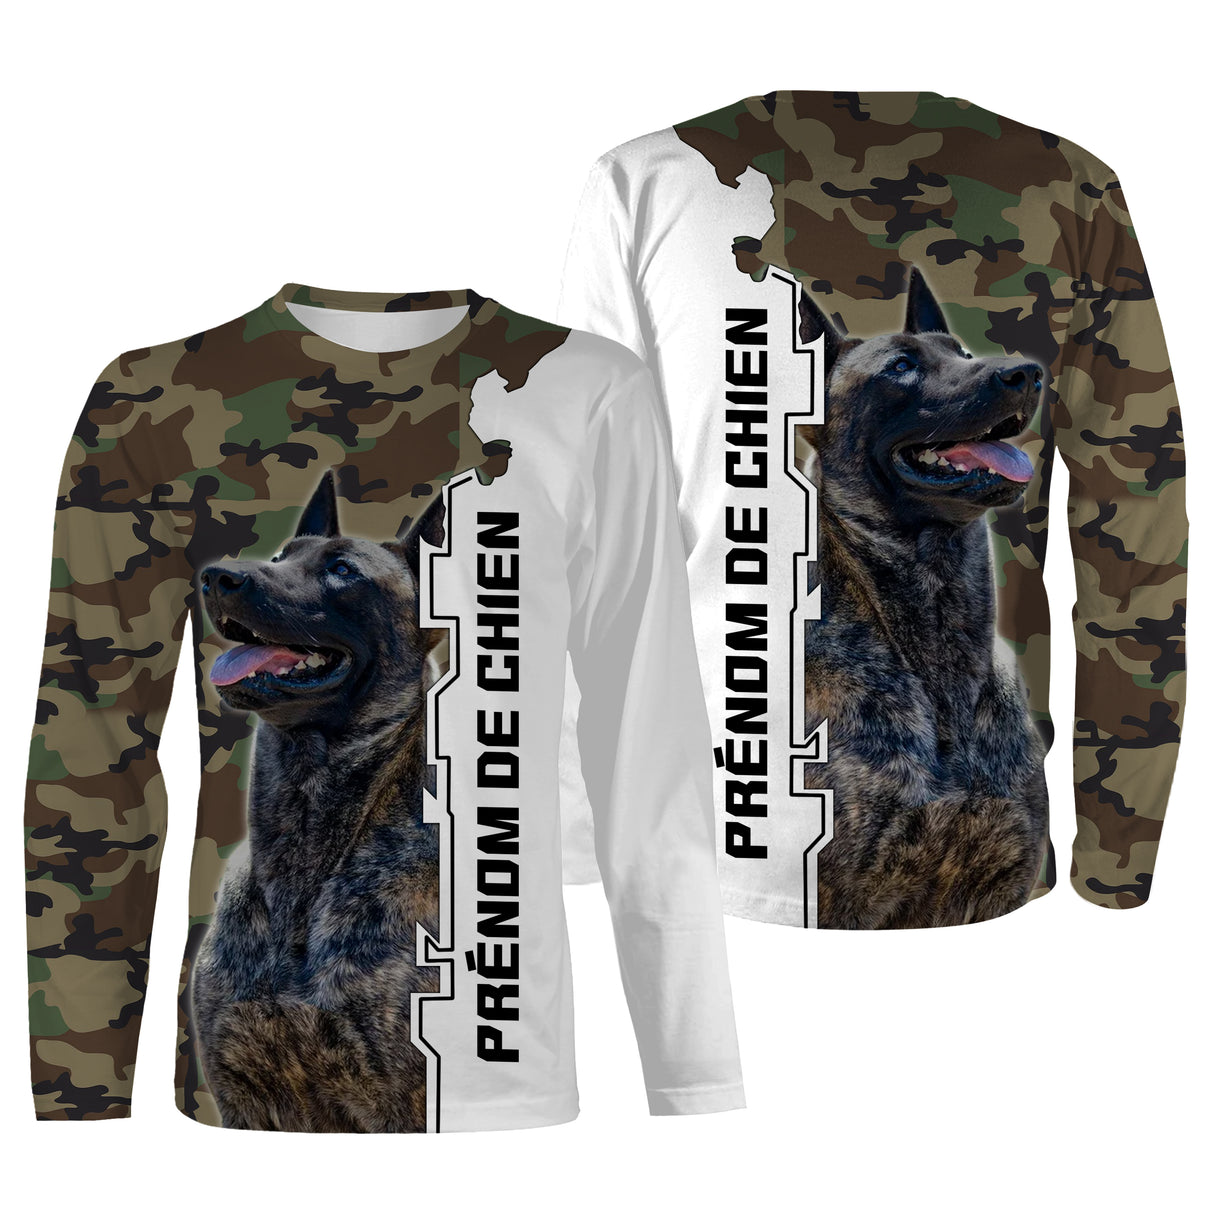 The Dutch Shepherd, Dog Breed Originating from the Netherlands, T-shirt, Hooded Sweatshirt for Men, Women, Personalized Gift - CTS14042213